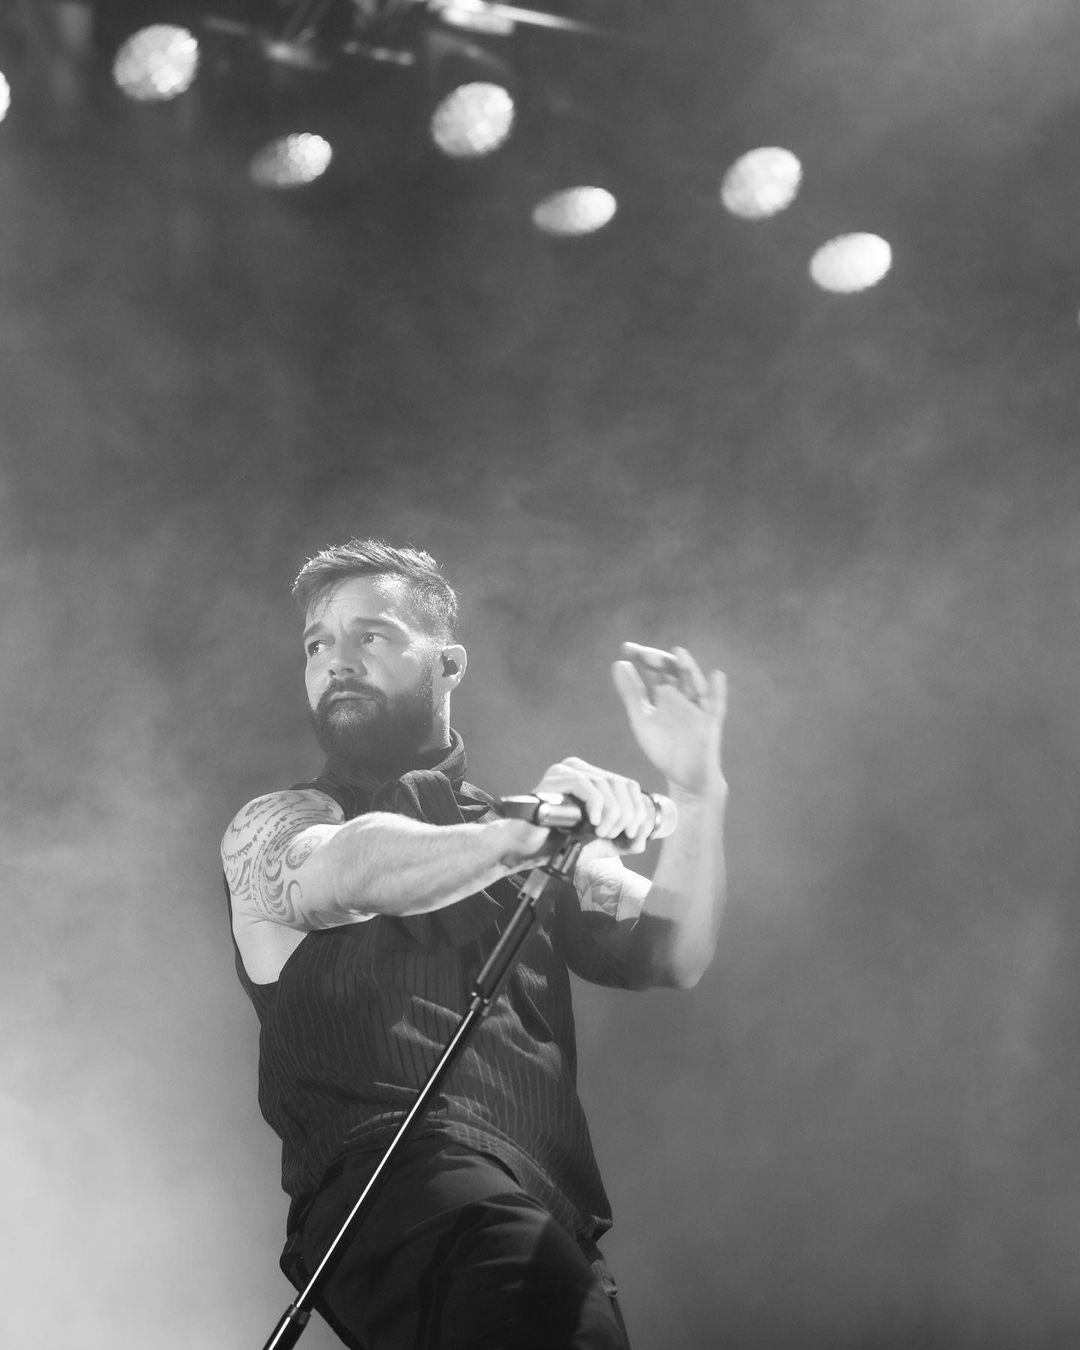 A portrait of Ricky Martin performing